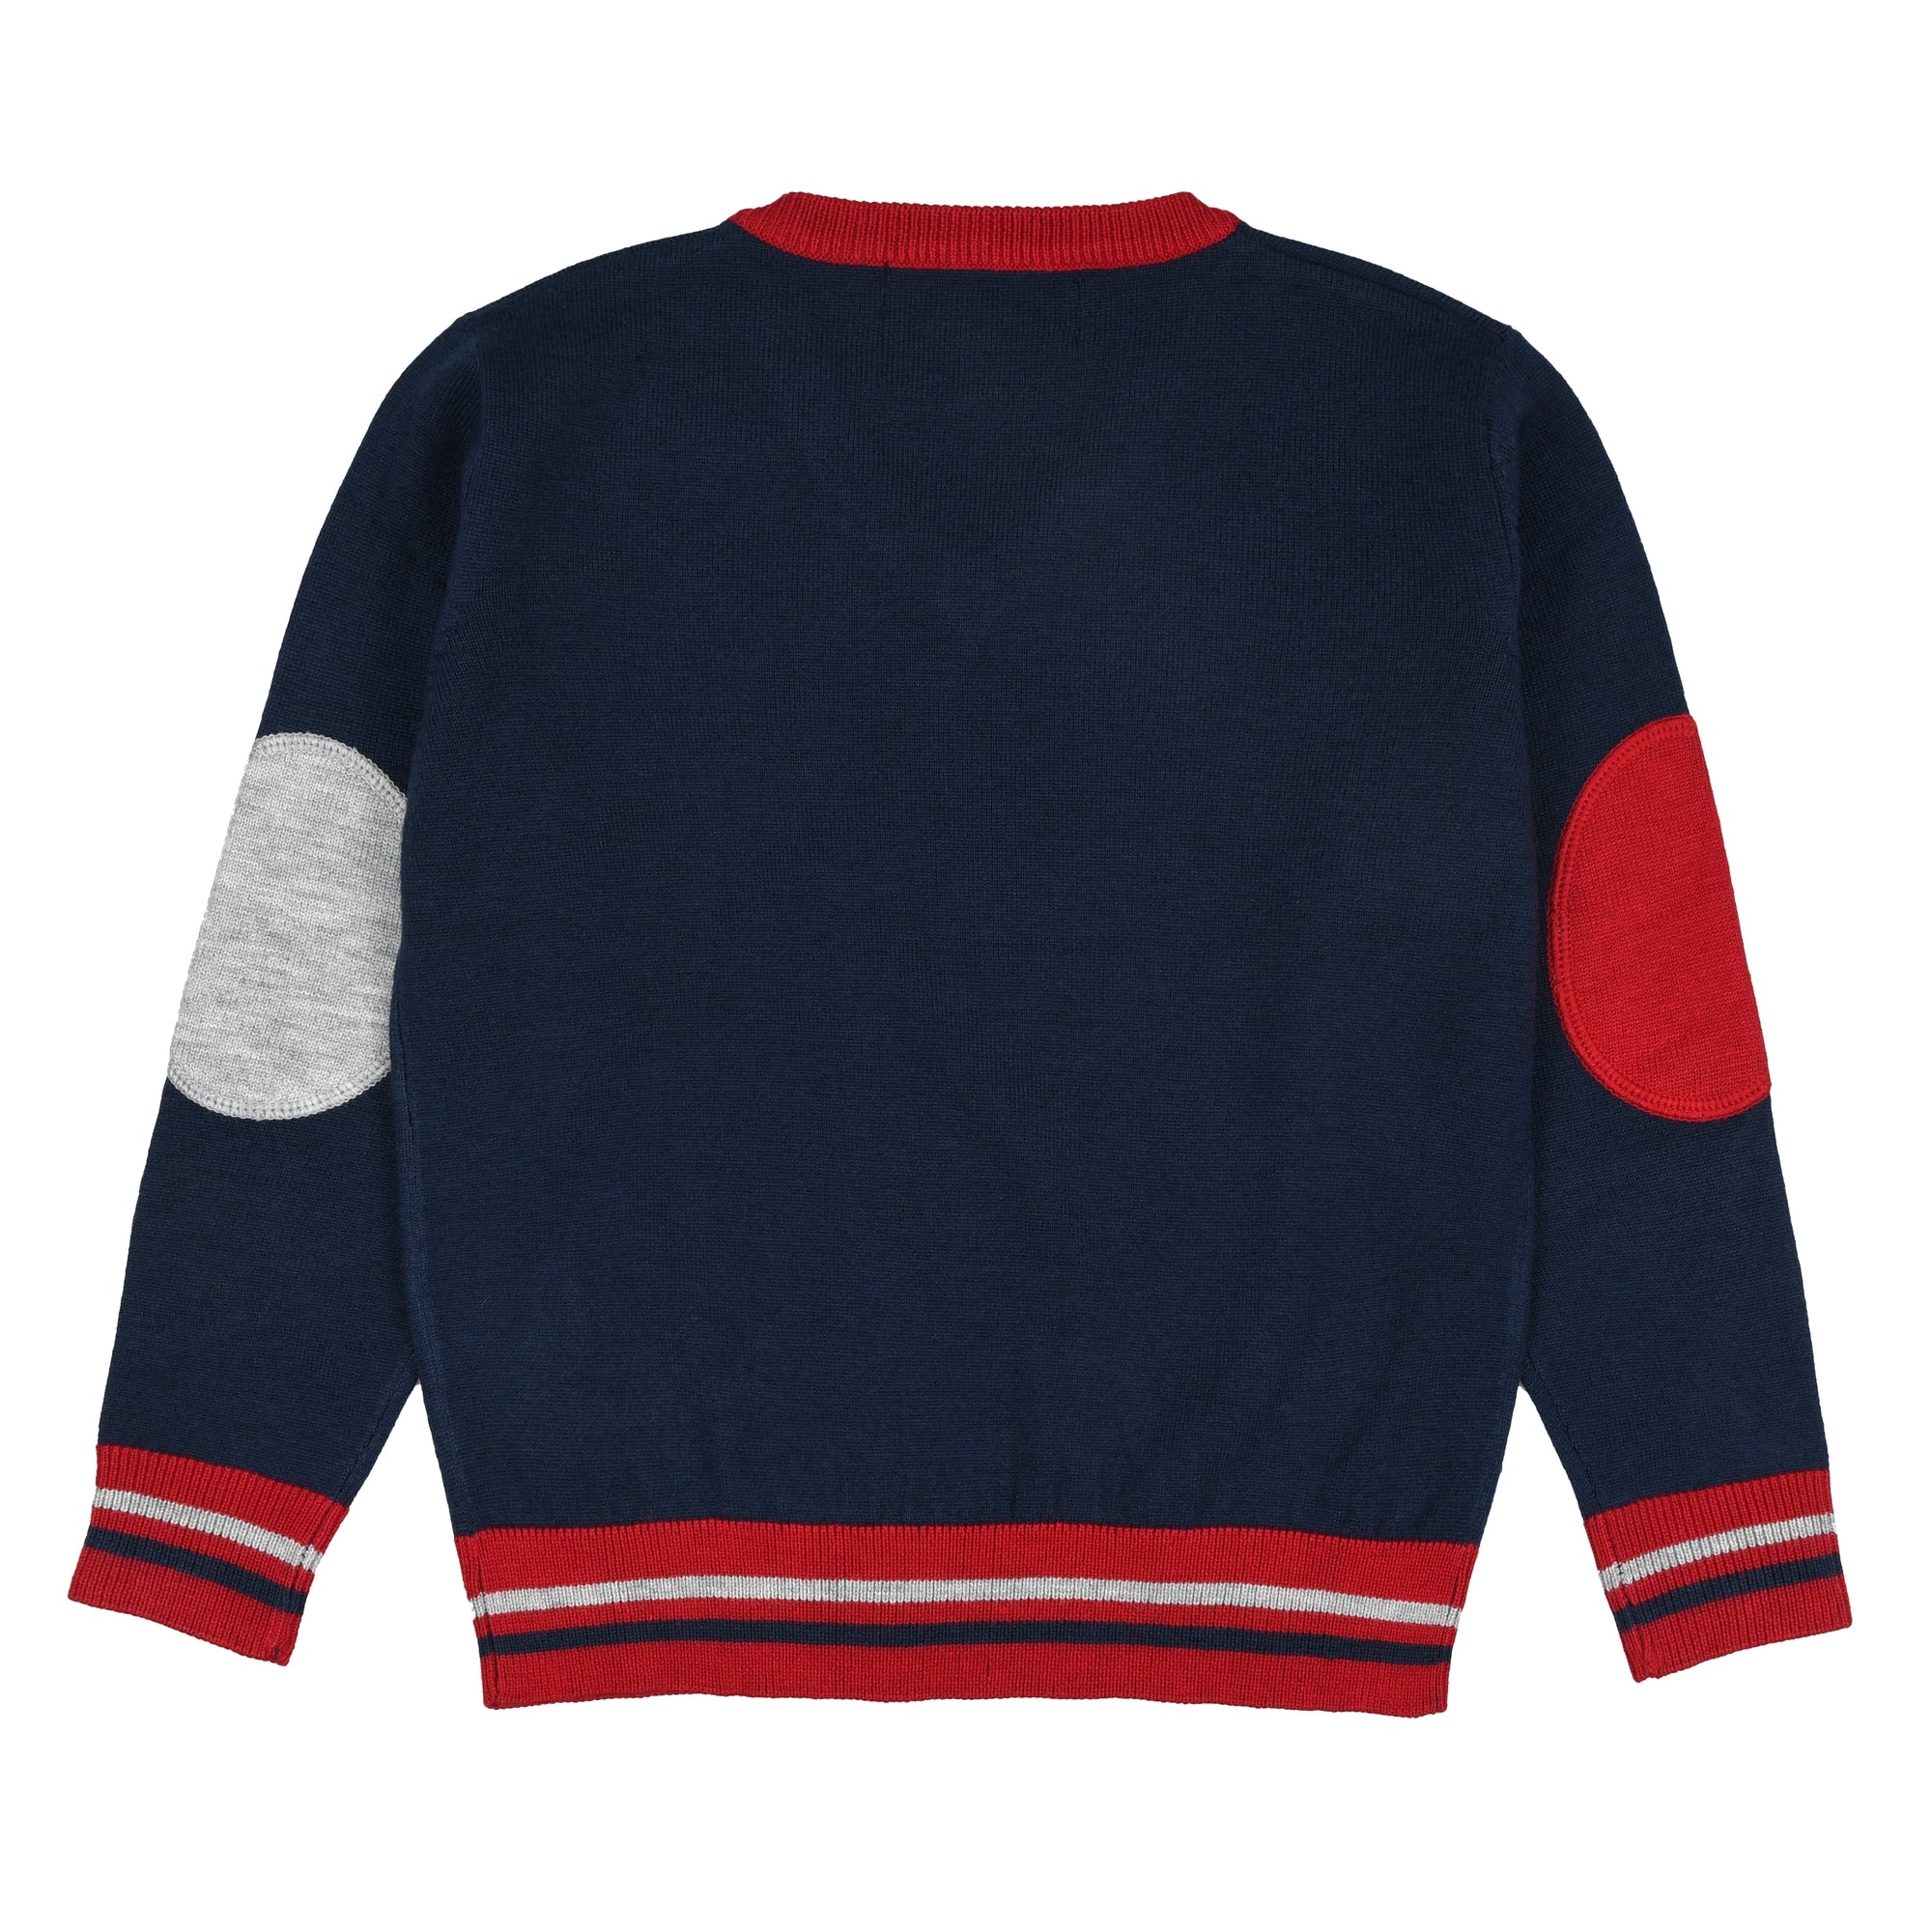 Gauge 12 V-neck sweater with patches